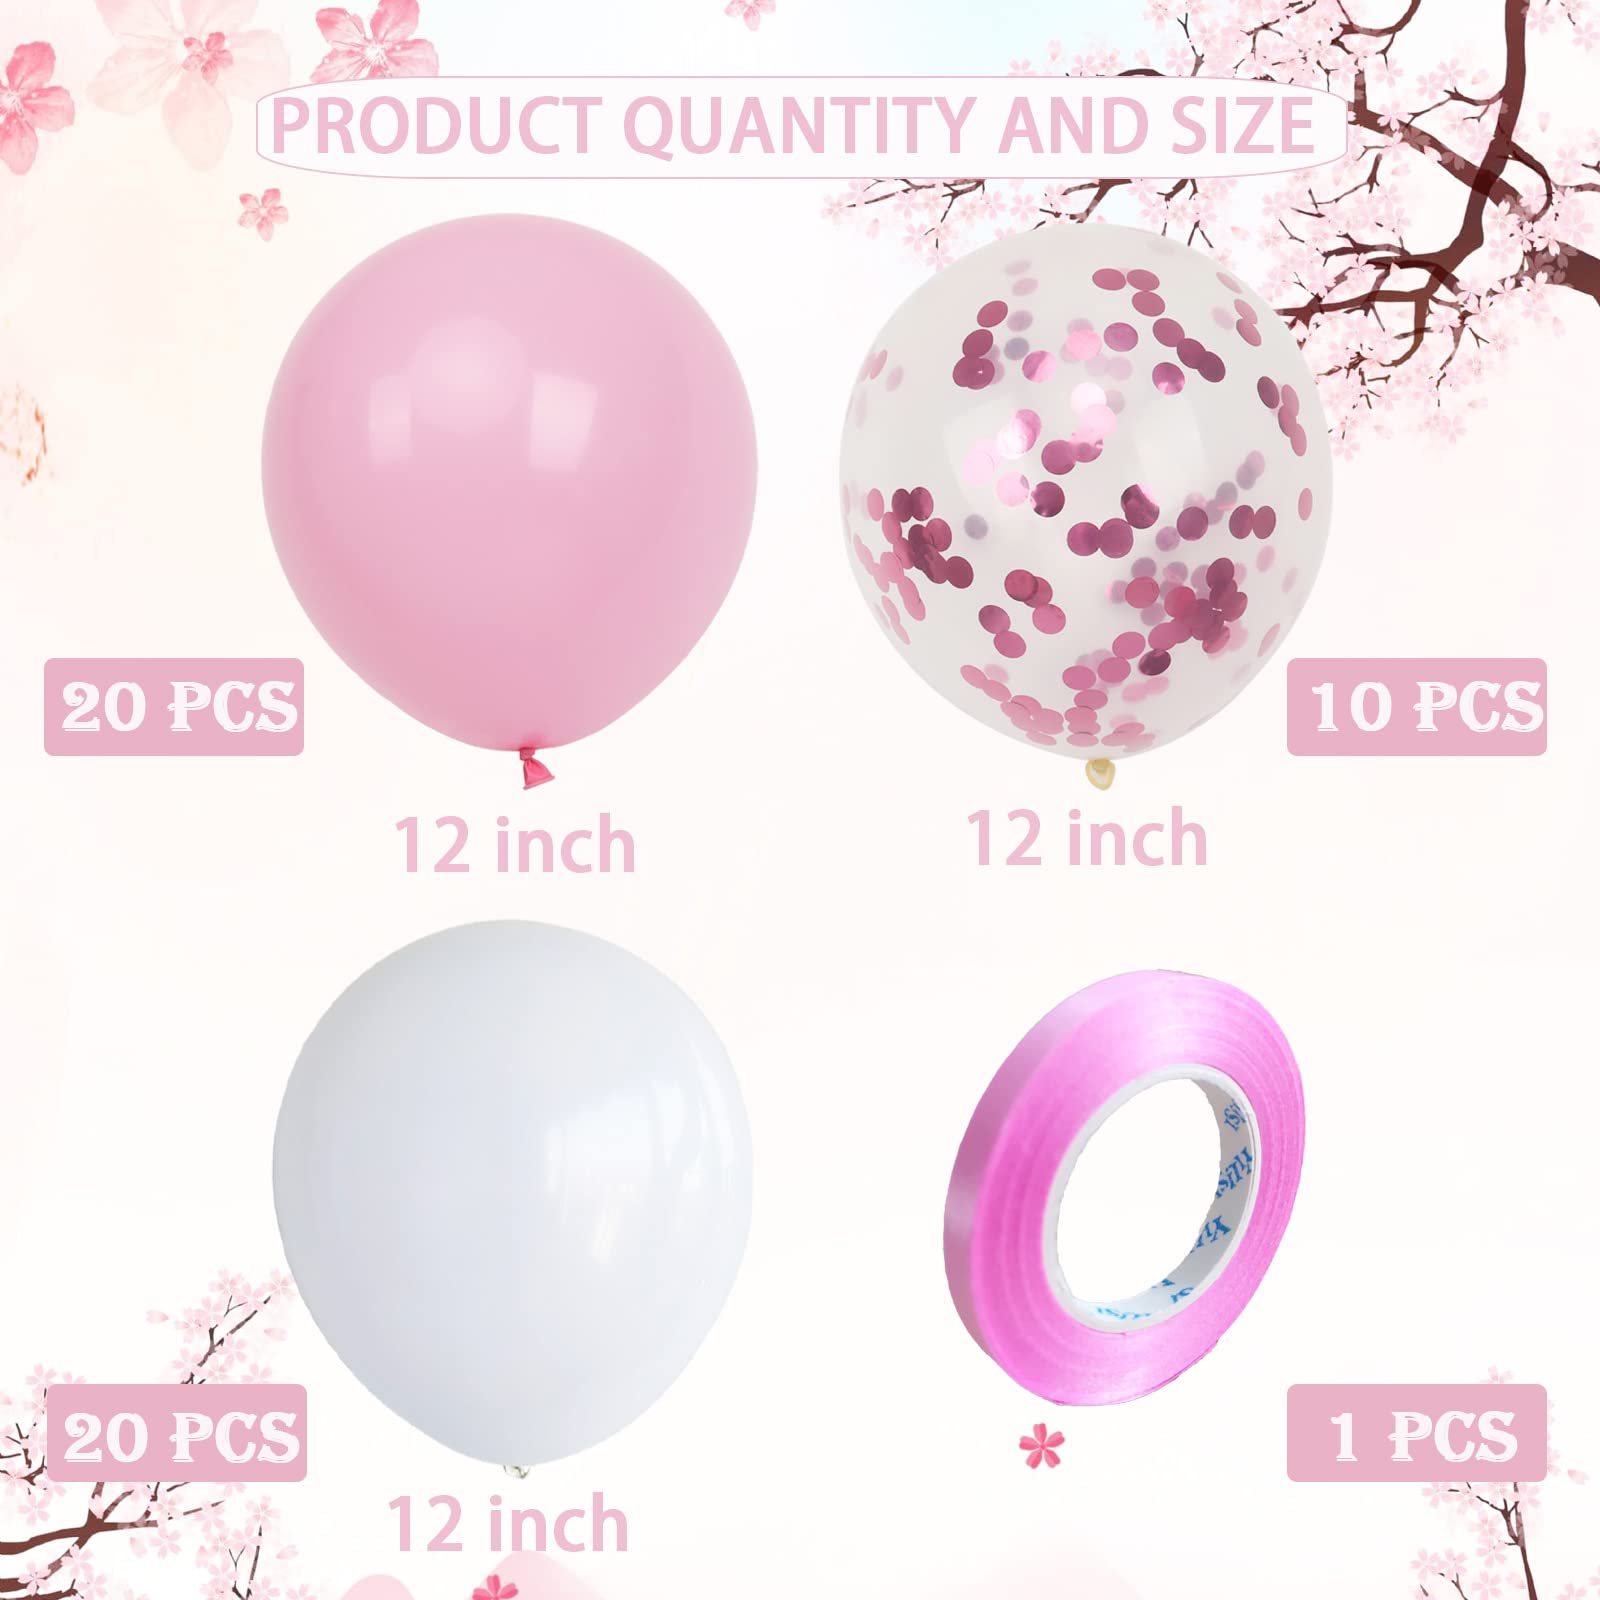 Pink Balloons Party Decorations, 50 Pcs 12 In Birthday Decorations, Happy Birthday Balloons with Pink Balloons and White Balloons